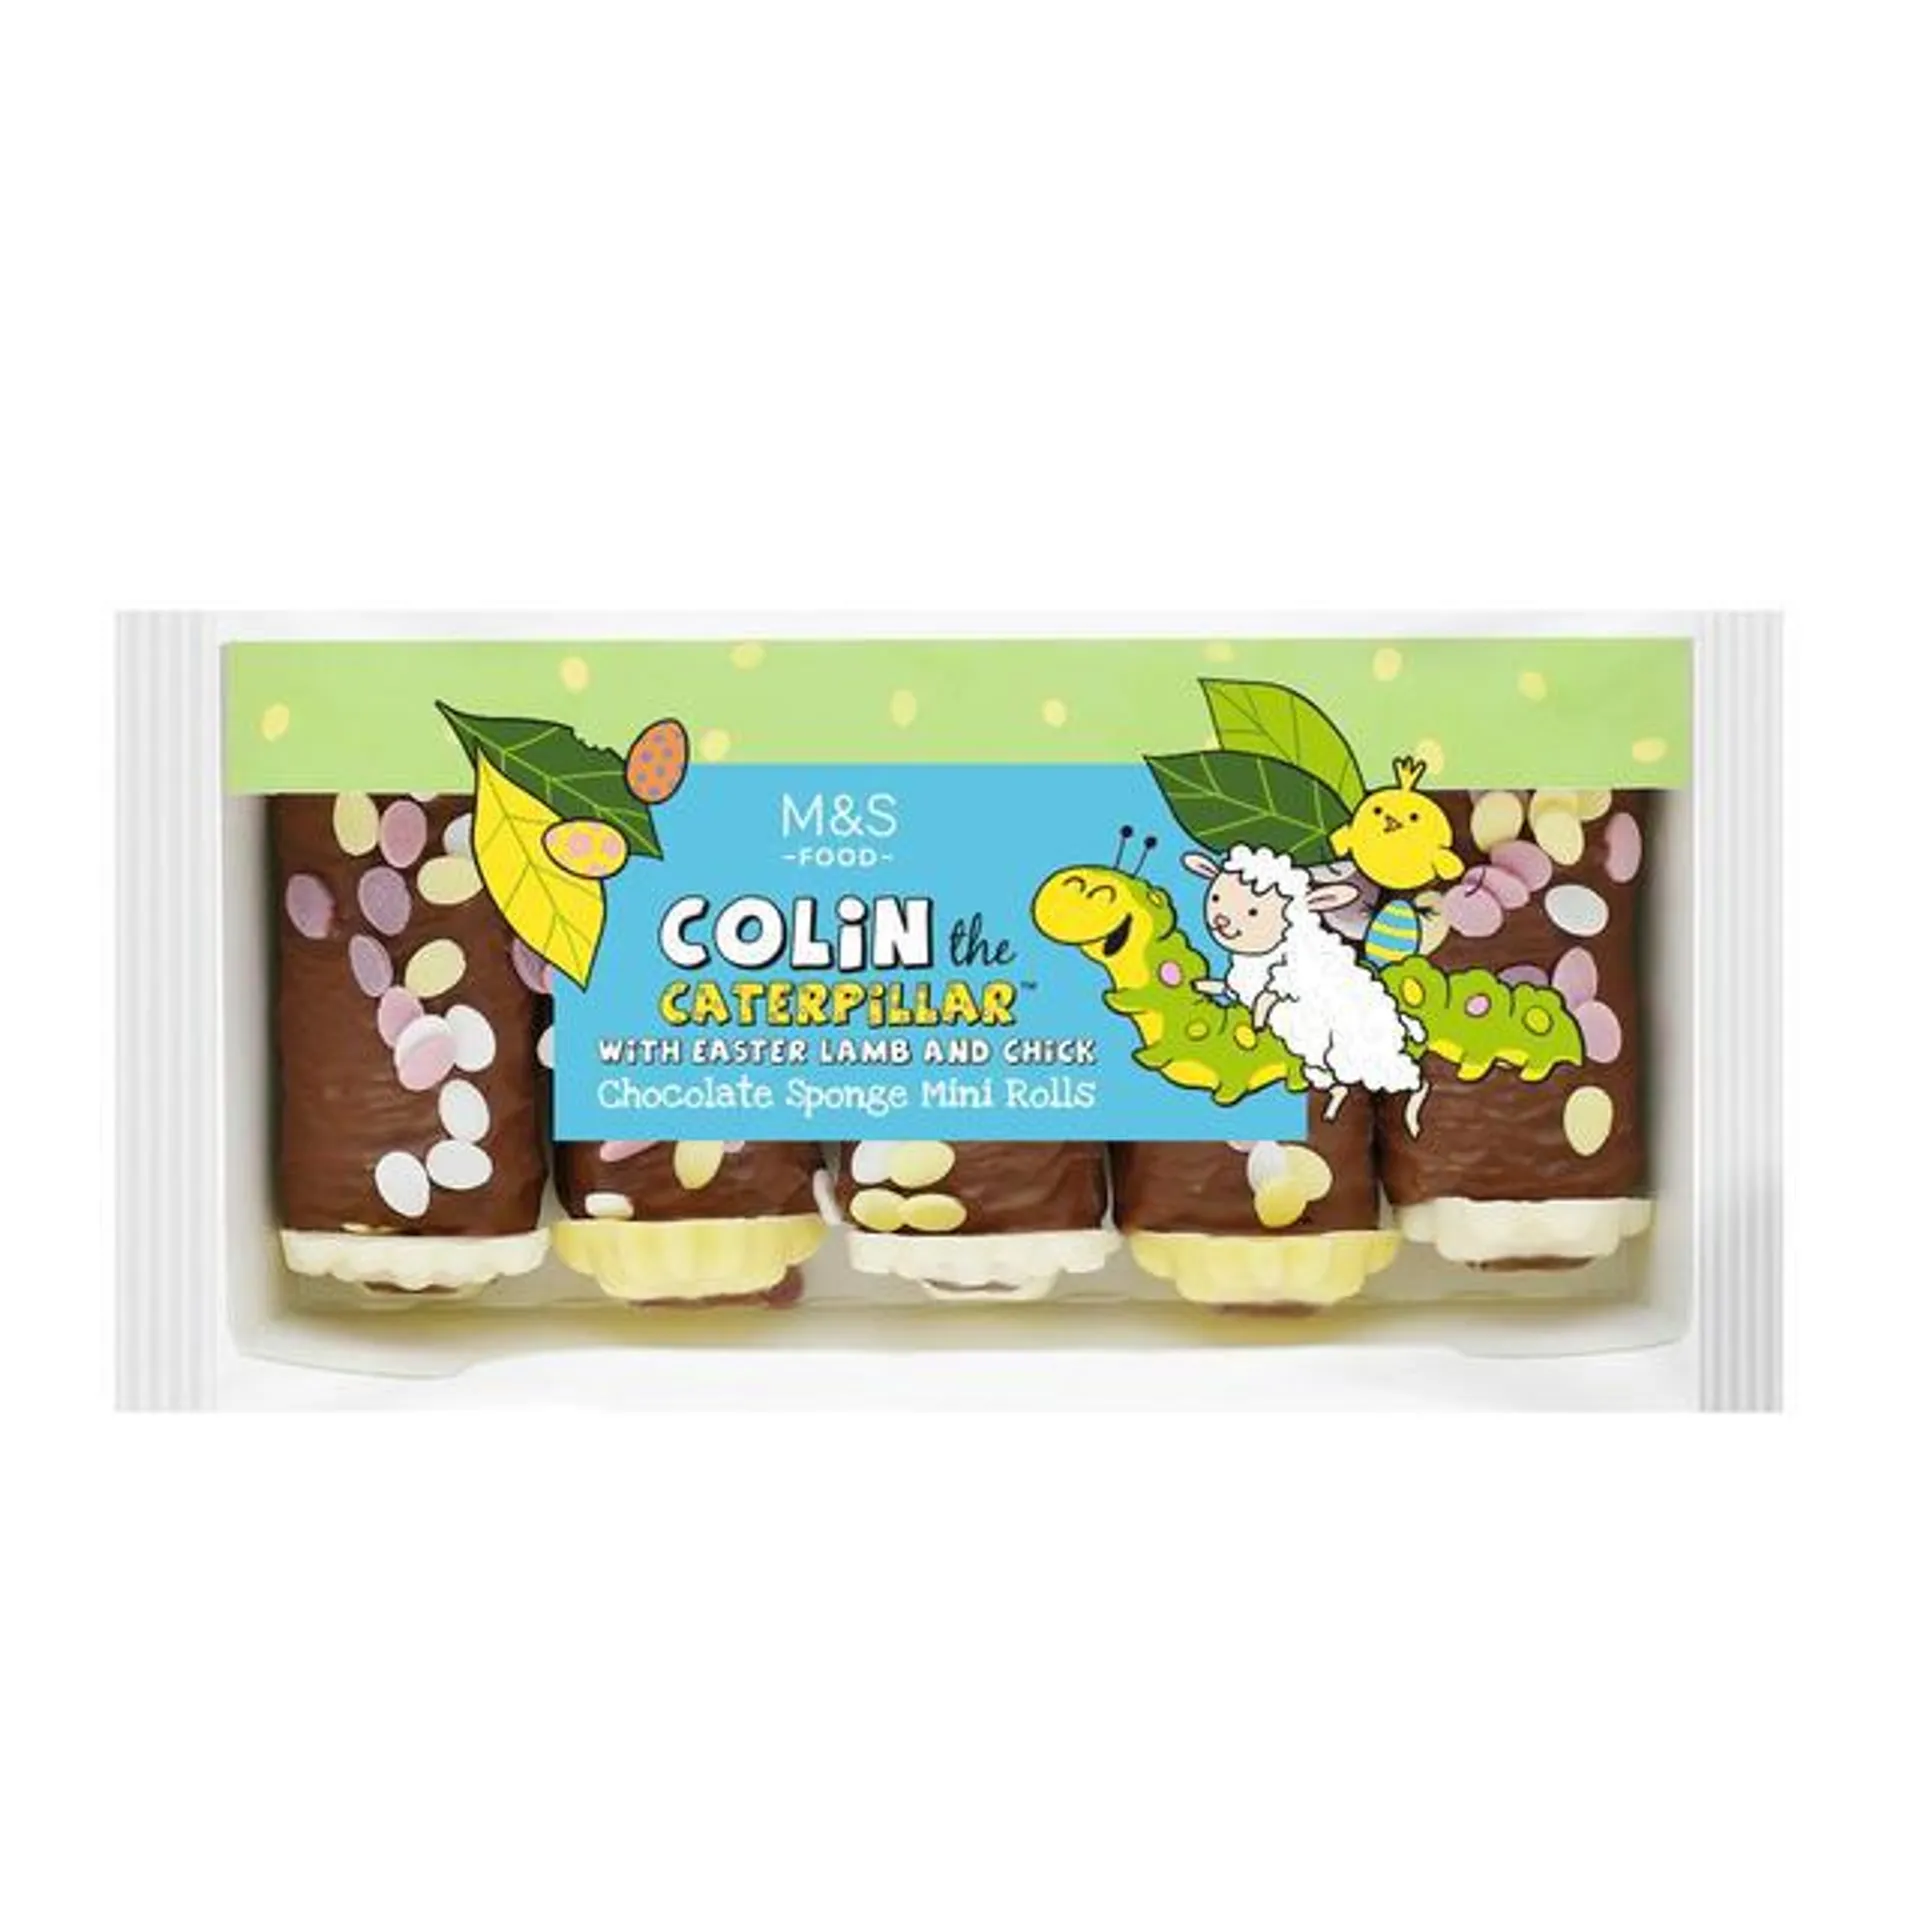 M&S Colin the Caterpillar with Easter Lamb and Chick 170g